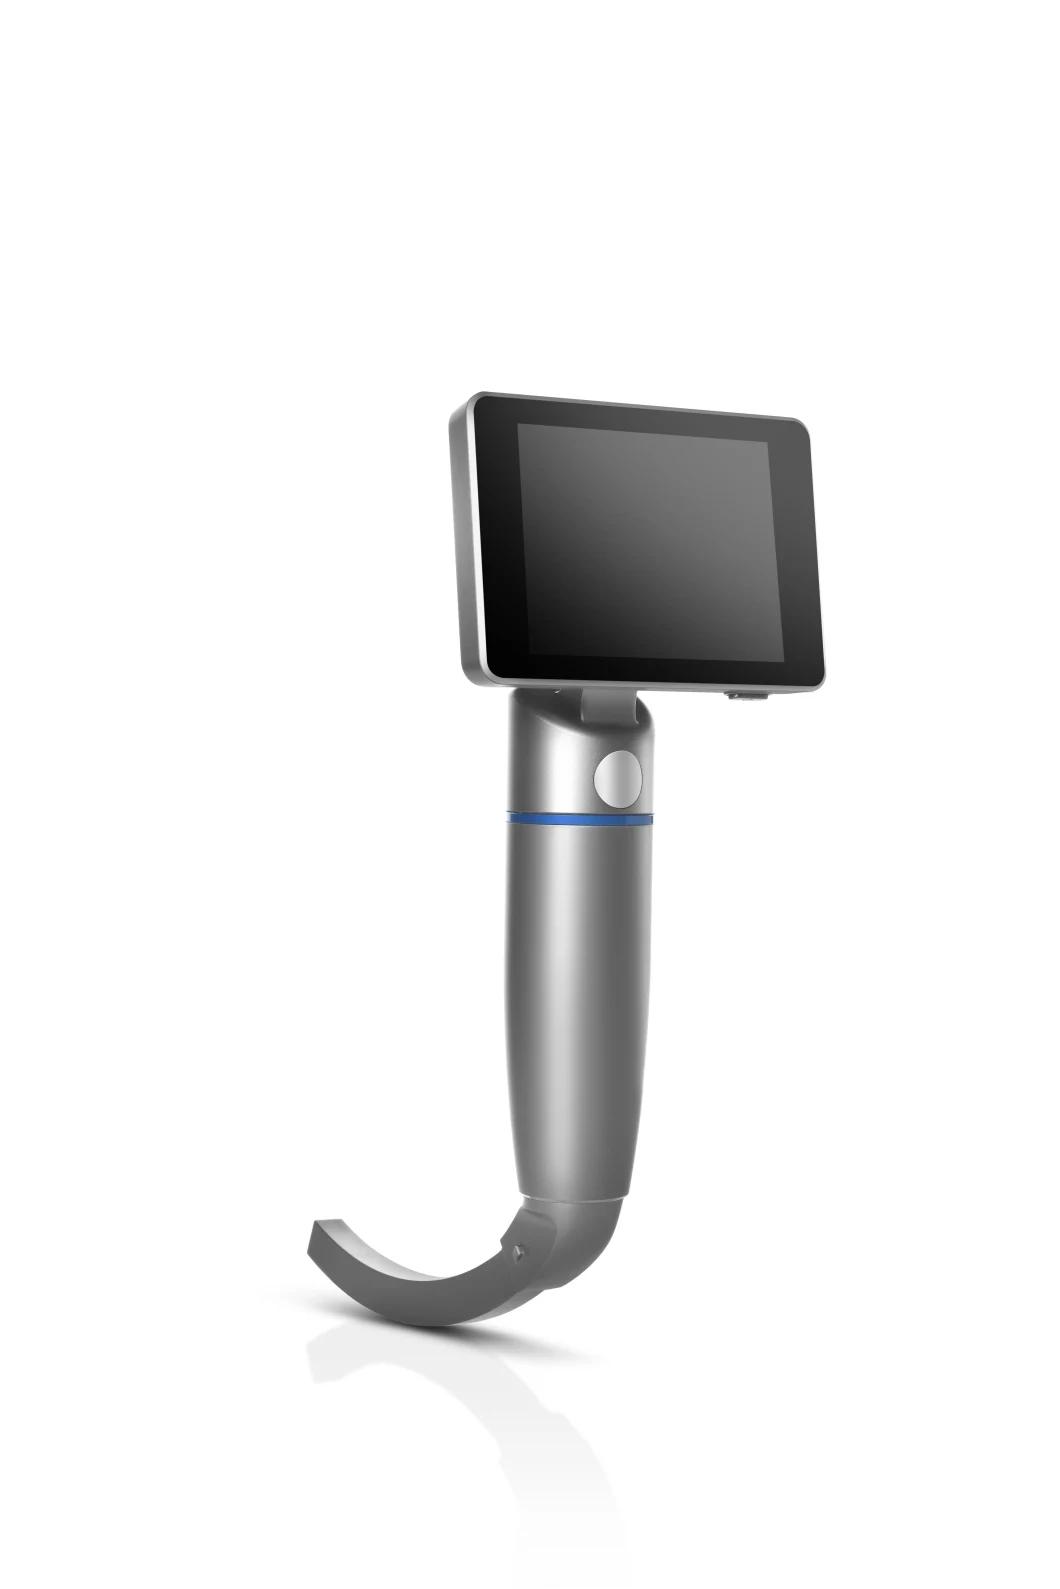 Anesthesia Video Laryngoscope Used for Difficult Endotracheal Tube Intubations